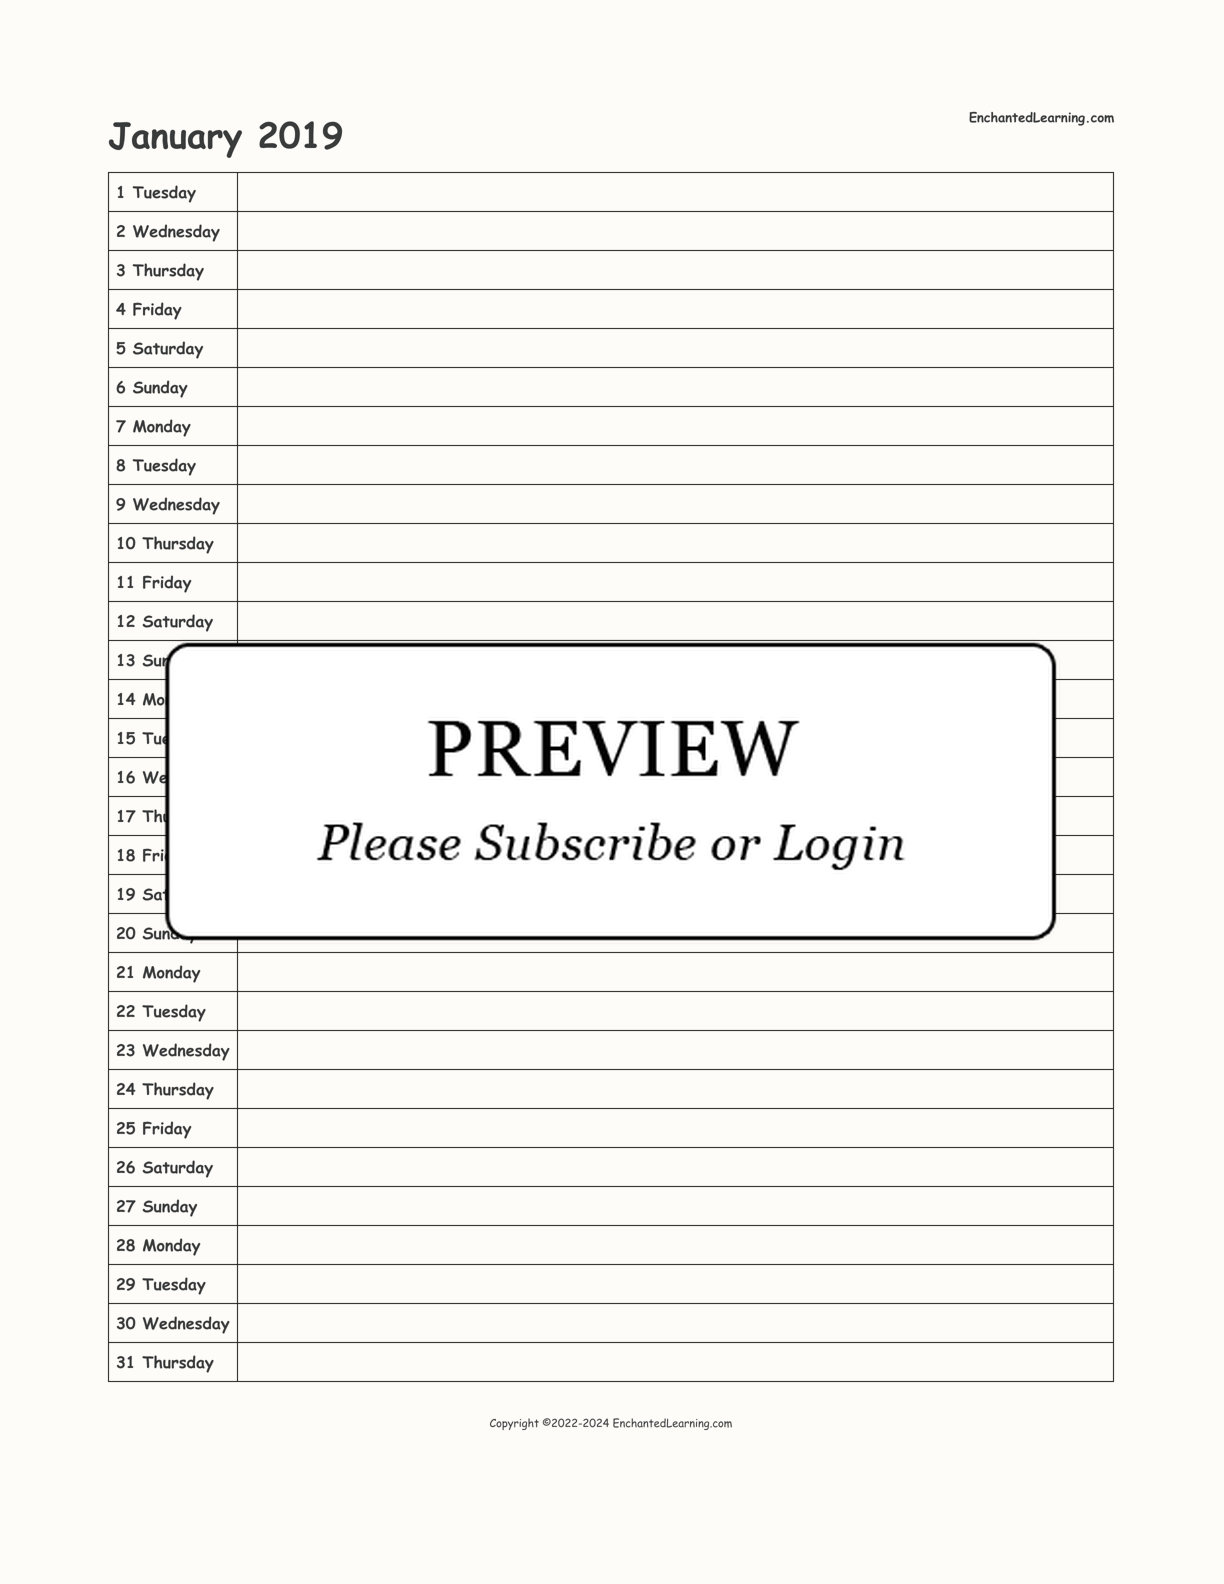 2019 Scheduling Calendar interactive printout page 1